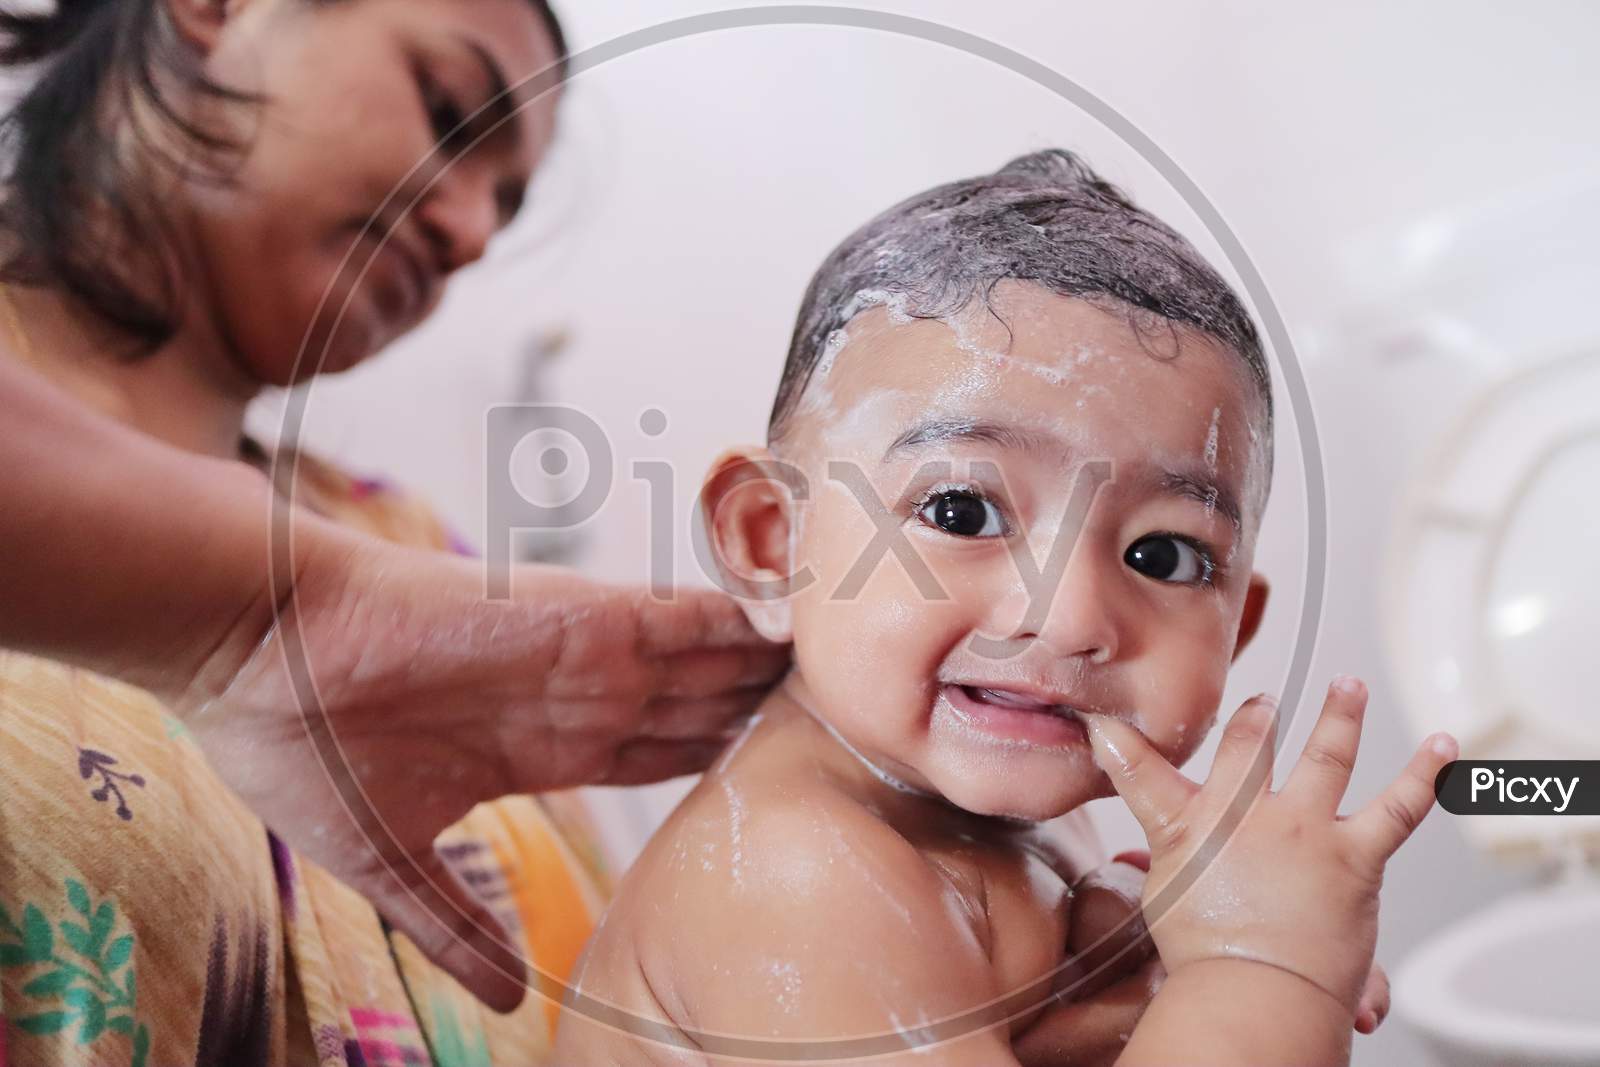 Indian Baby Enjoying Bubble Bath With Foam While Mother Rubs Soap On His Back